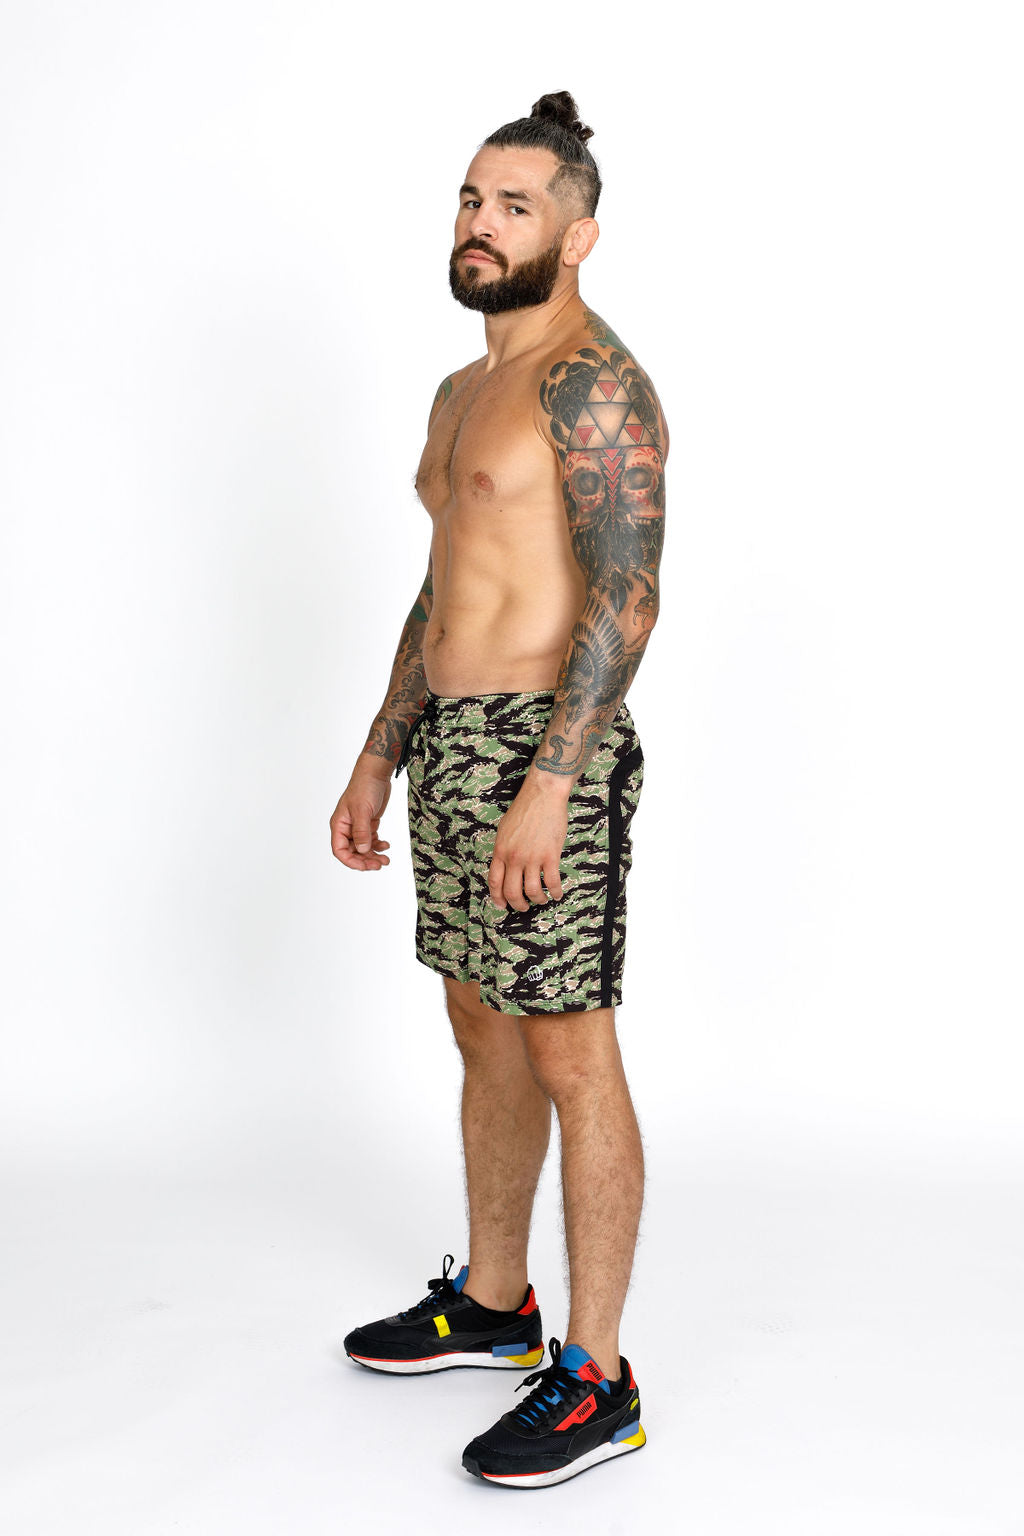 Men's Beach Gear: Your Ultimate Guide to Stylish Essentials – Shop